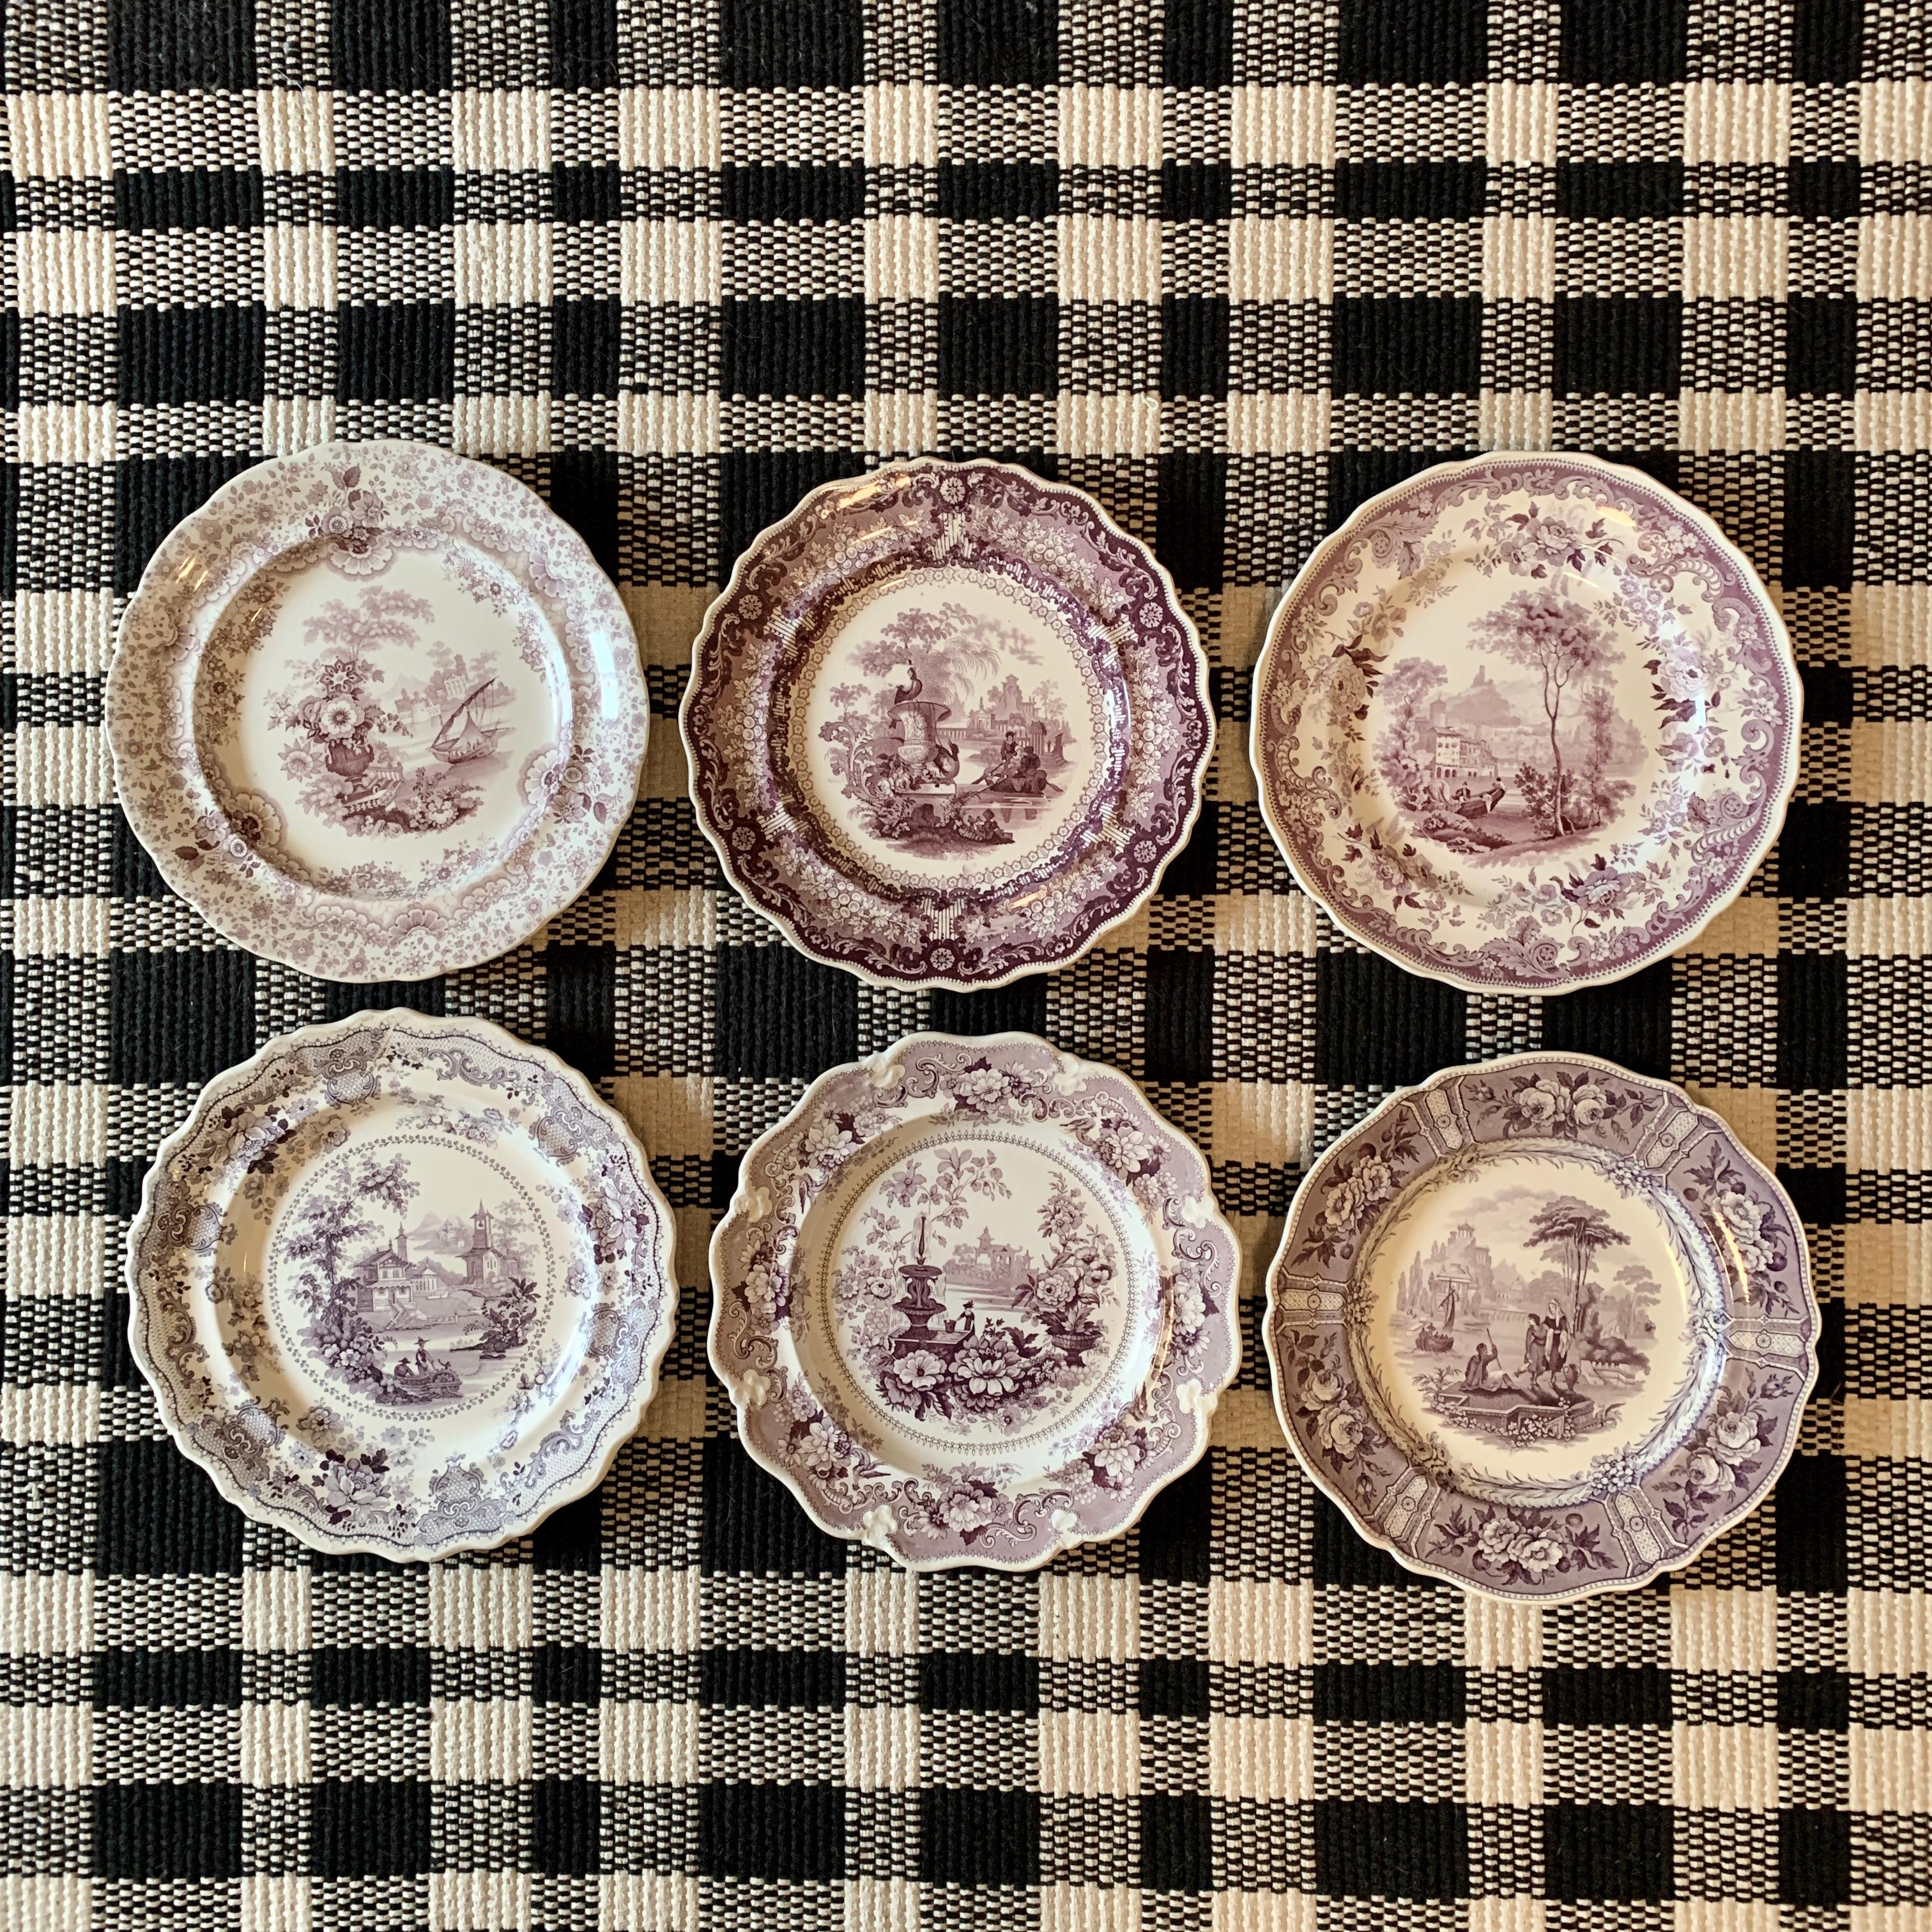 An assembled set of six different patterns of purple on white earthenware Transferware dinner plates, Staffordshire, England, circa 1822-1887, 19th century.

The patterns include:

Carolina– Maker: Ralph Hall & Co. Tunstall, Staffordshire –